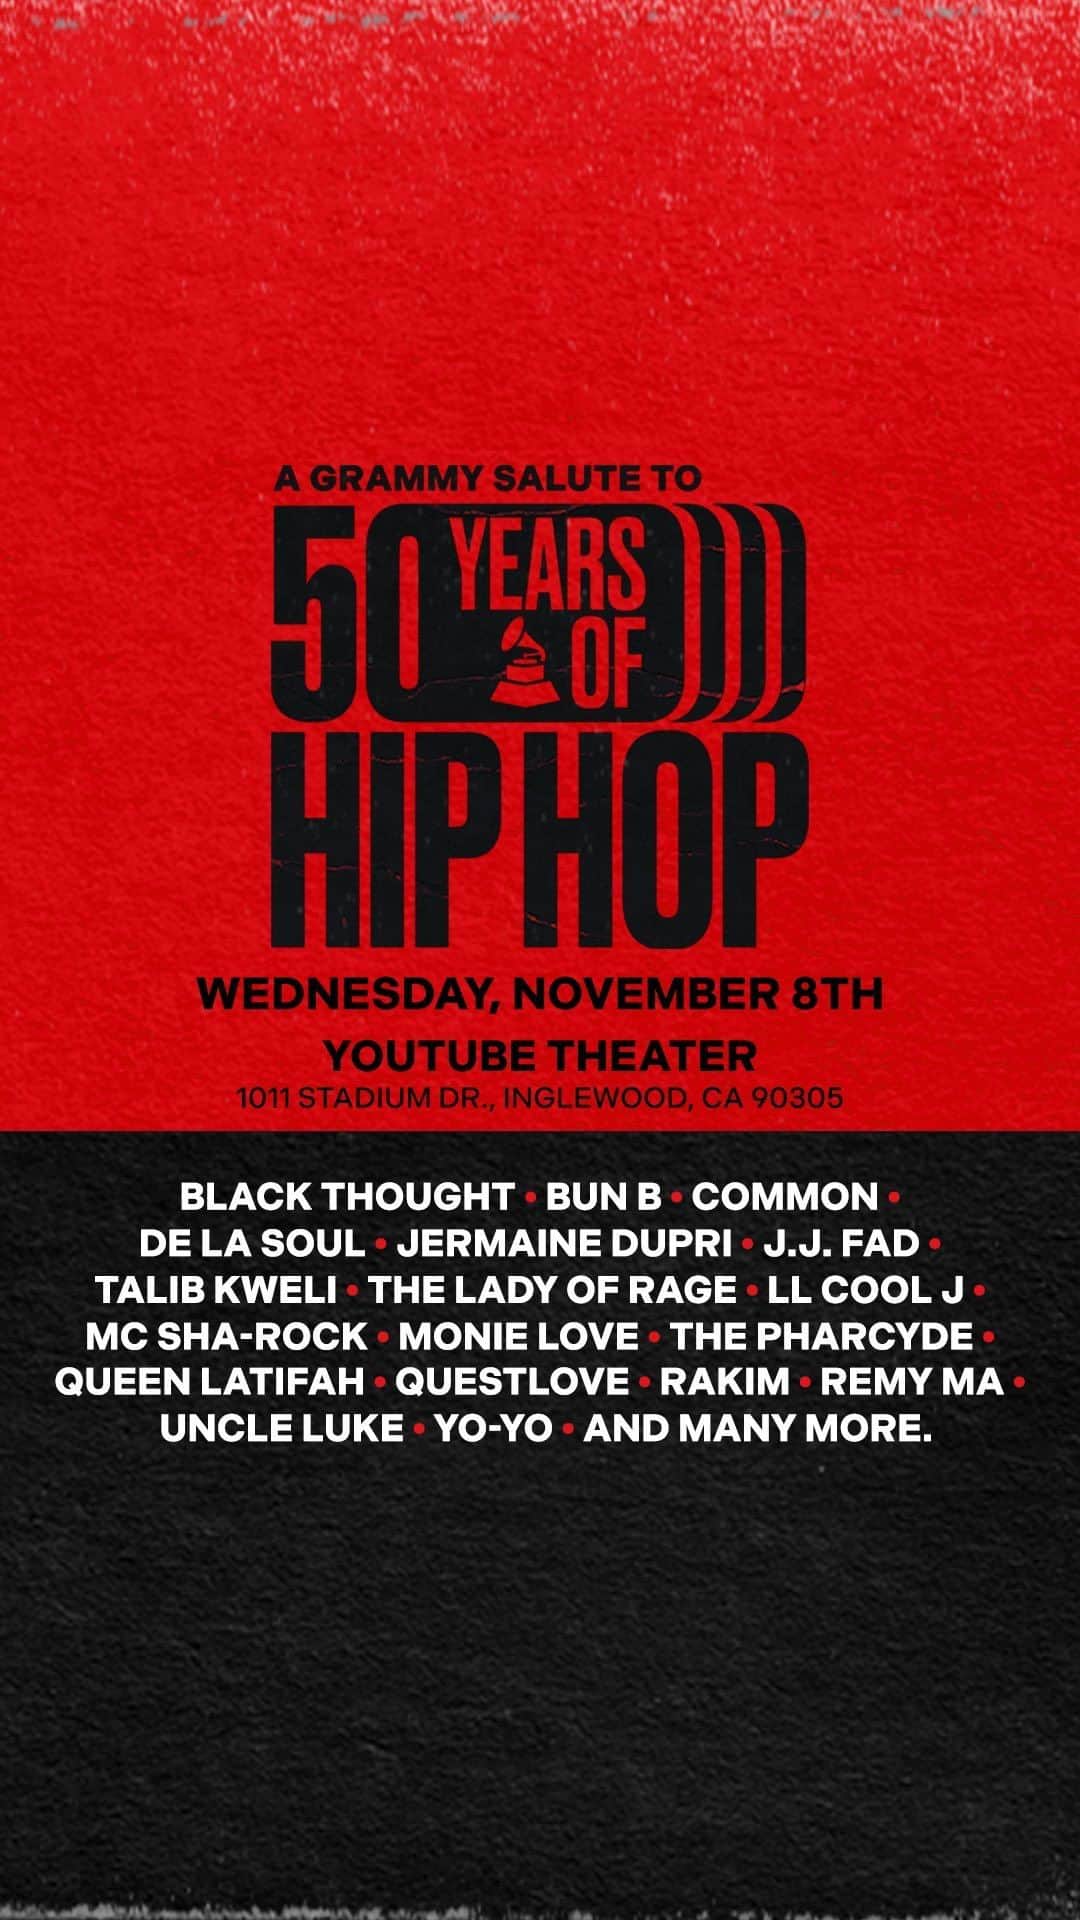 The GRAMMYsのインスタグラム：「🎤 Get ready for an unforgettable journey through 50 years of hip-hop history! On November 8, 2023, the @YouTubeTheater will be the stage for the Recording Academy and @CBStv GRAMMY Salute to 50 Years of Hip-Hop.  ✨ Join us as we pay homage to the roots and evolution of hip-hop with performances by iconic figures like @BlackThought, @BunB, @Common, @JermaineDupri, @LLCOOLJ, @QueenLatifah, @thegodrakim, and more.  🎟 Get your tickets now at the link in our bio. #GRAMMYSaluteHipHop50」